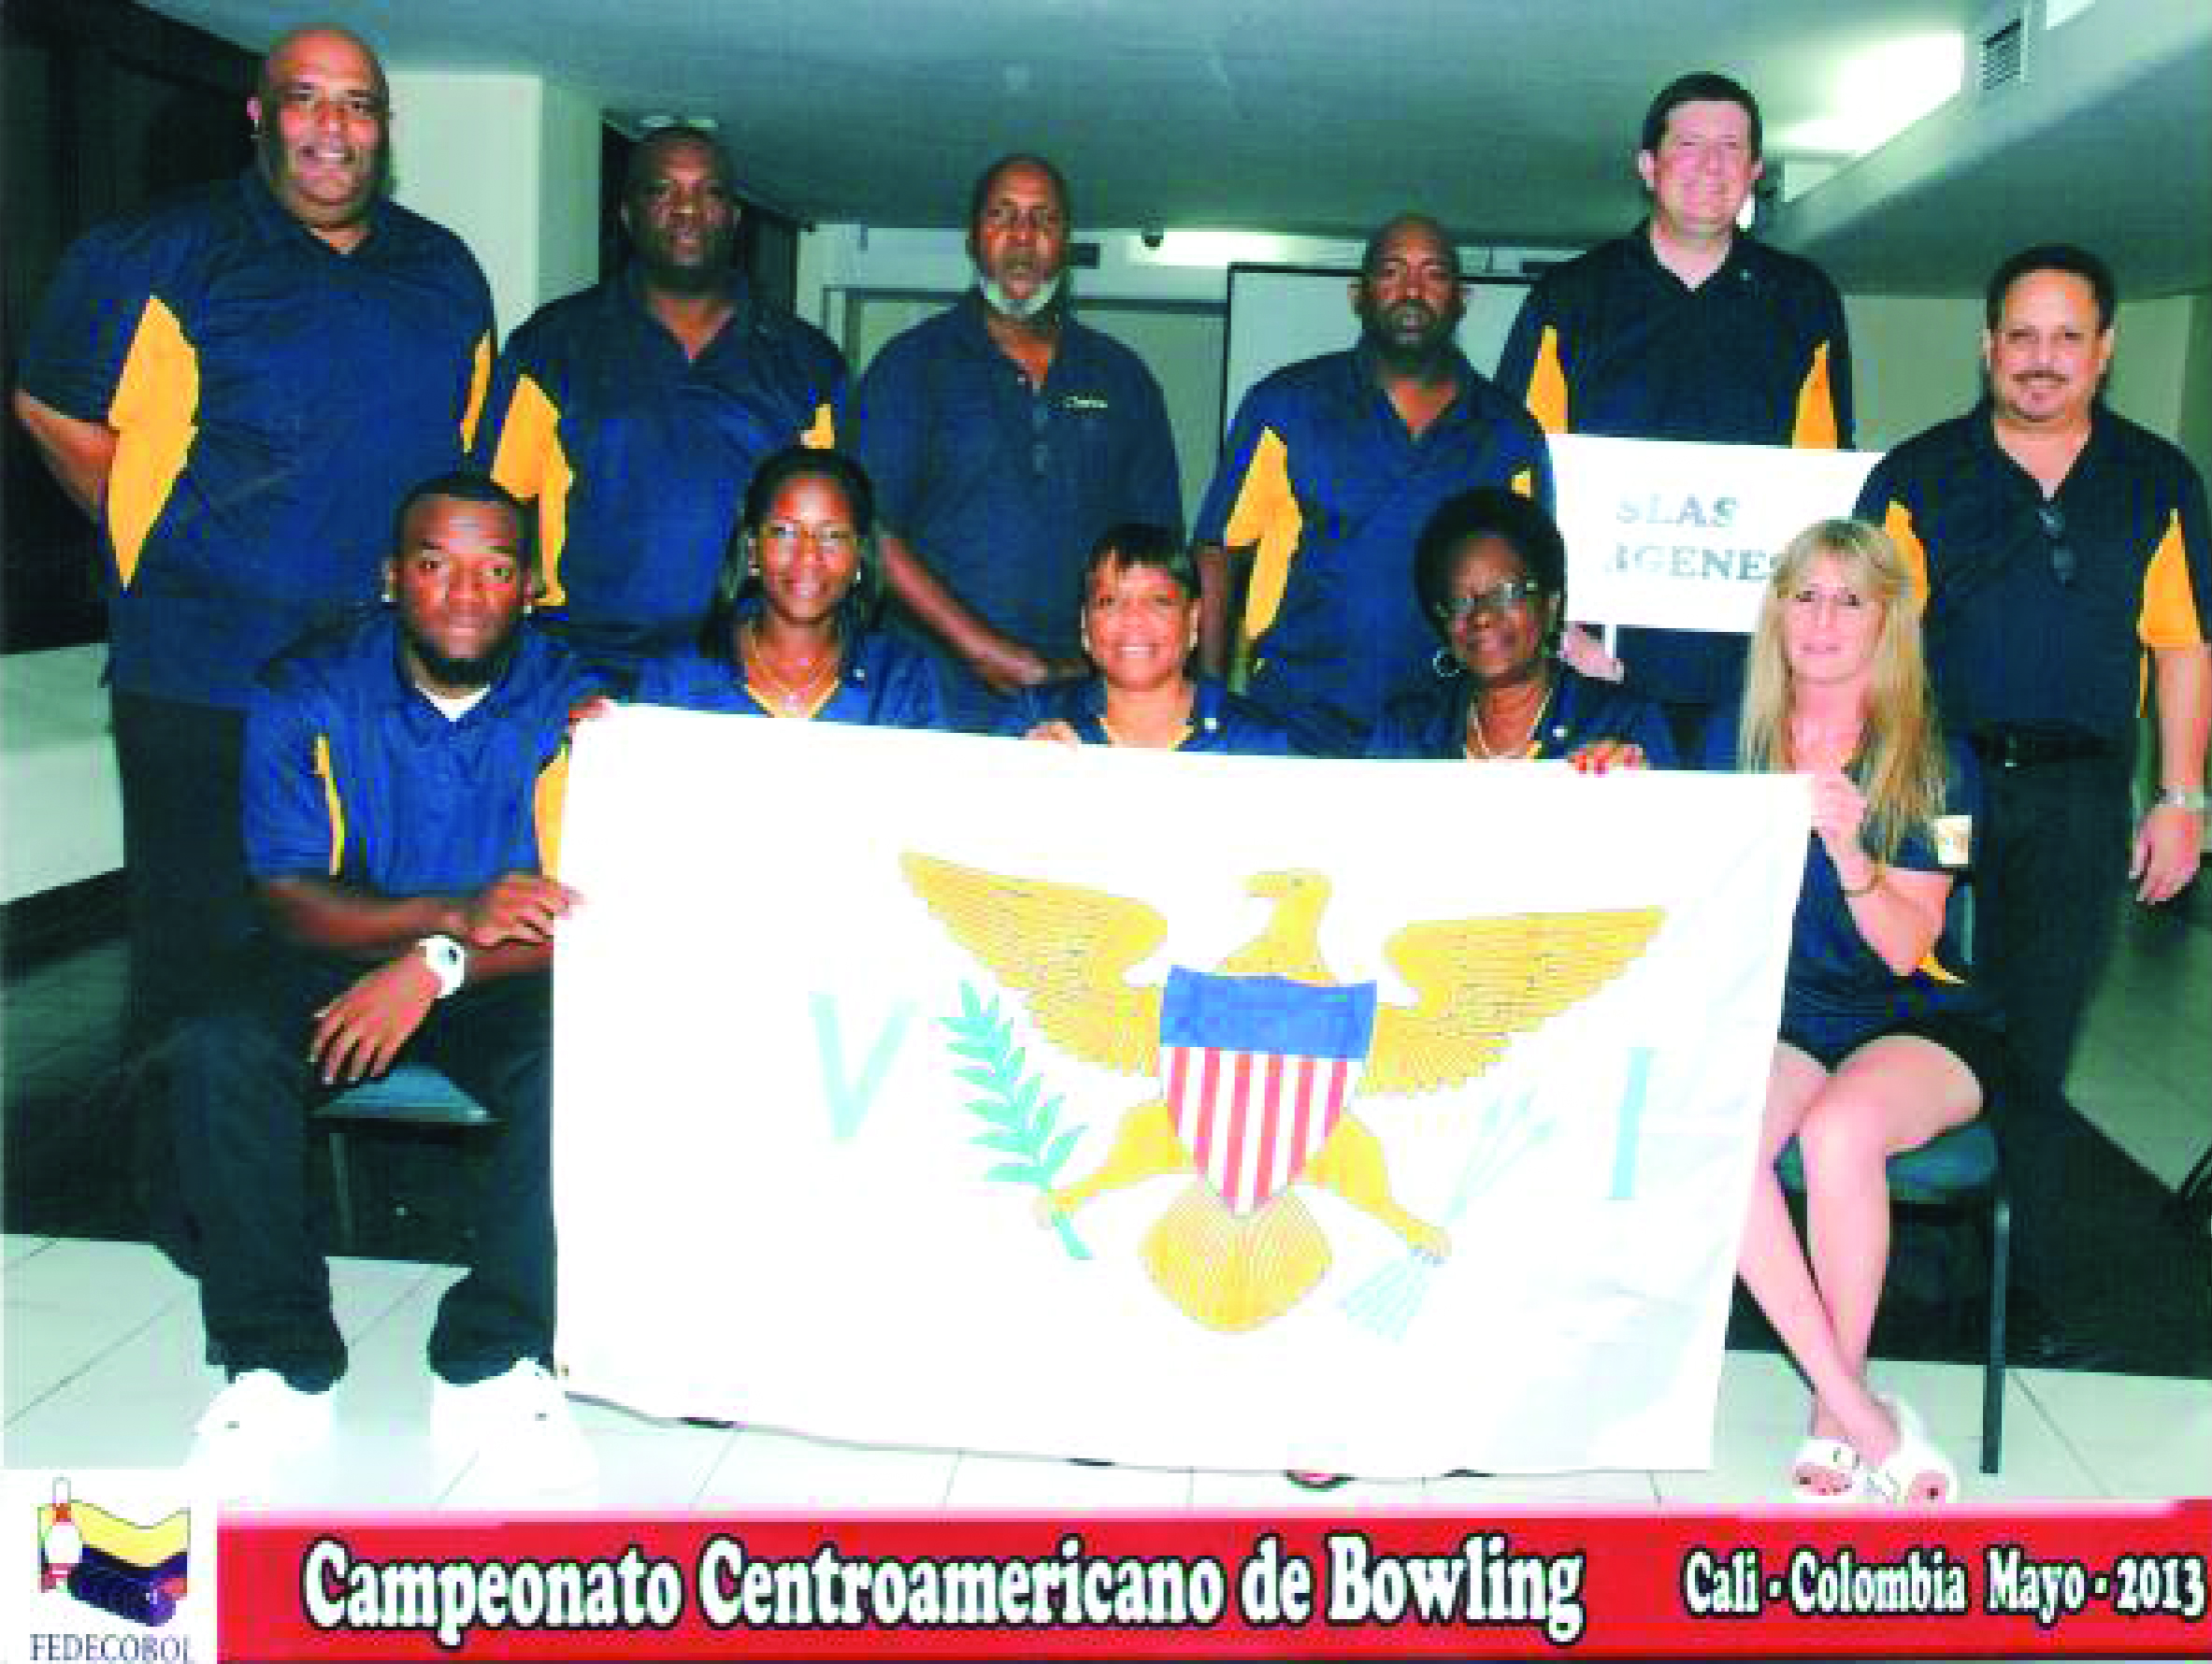 Members of the V.I. Bowling Federation Team in Cali, Columbia